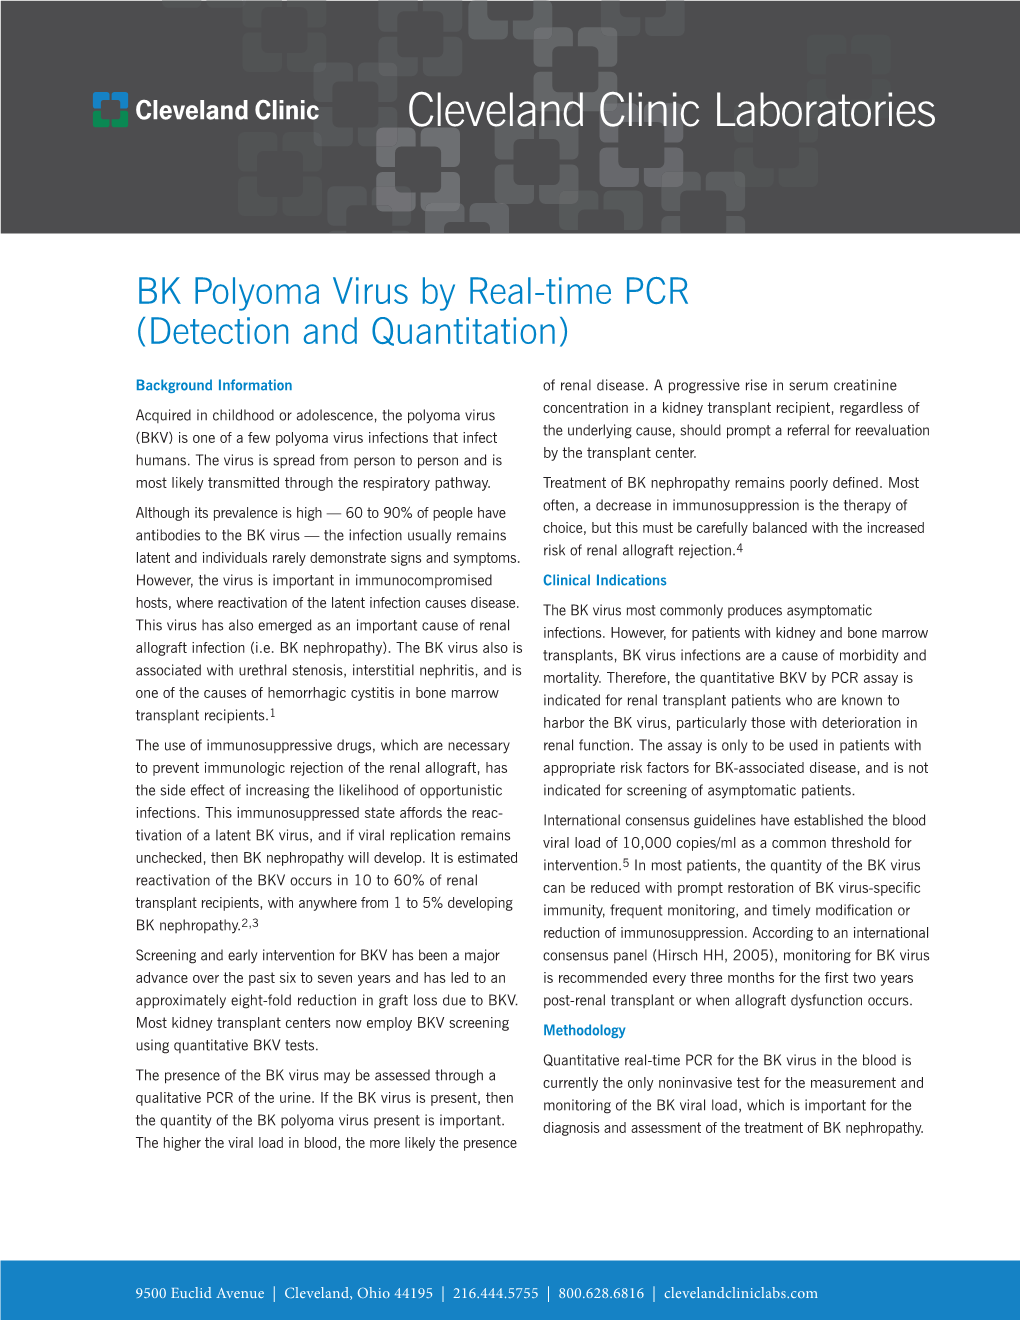 BK Polyoma Virus by Real-Time PCR (Detection and Quantitation)